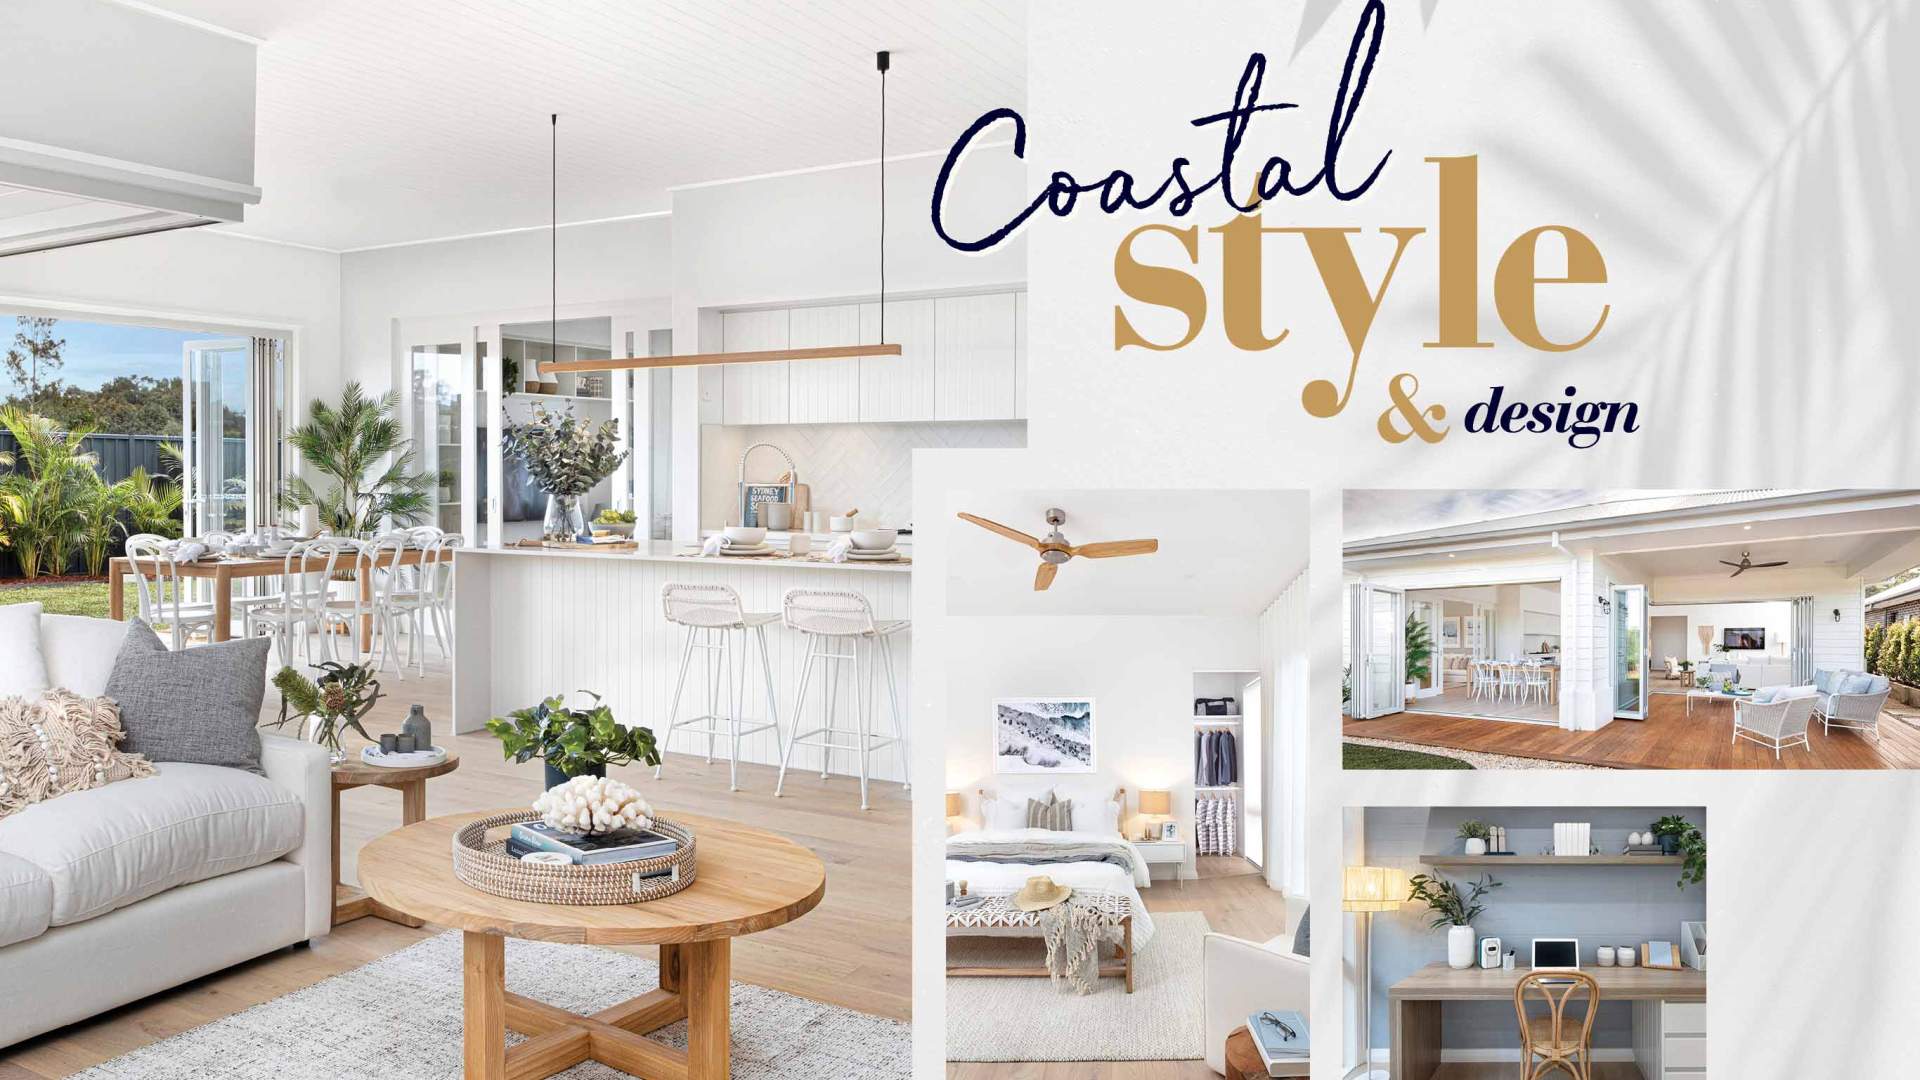 Australian Coastal Style - 7 steps to achieve this look - Making your Home  Beautiful